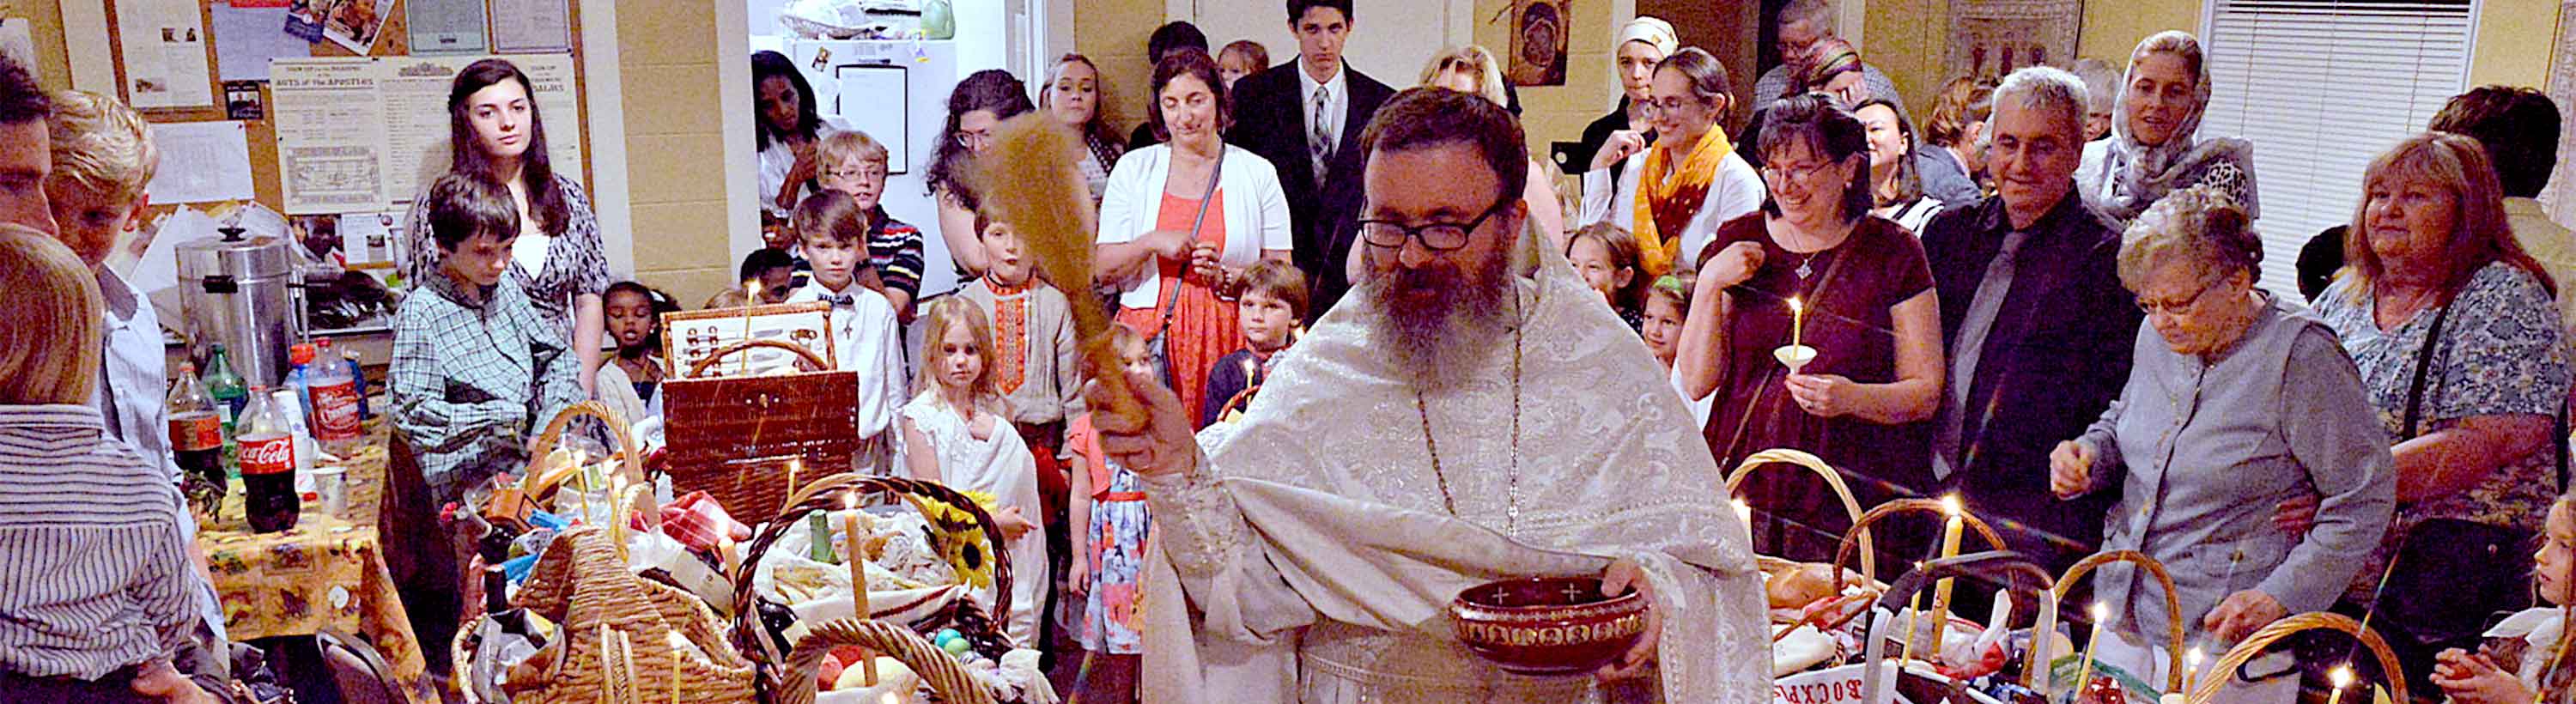 Blessing the Baskets on Pascha